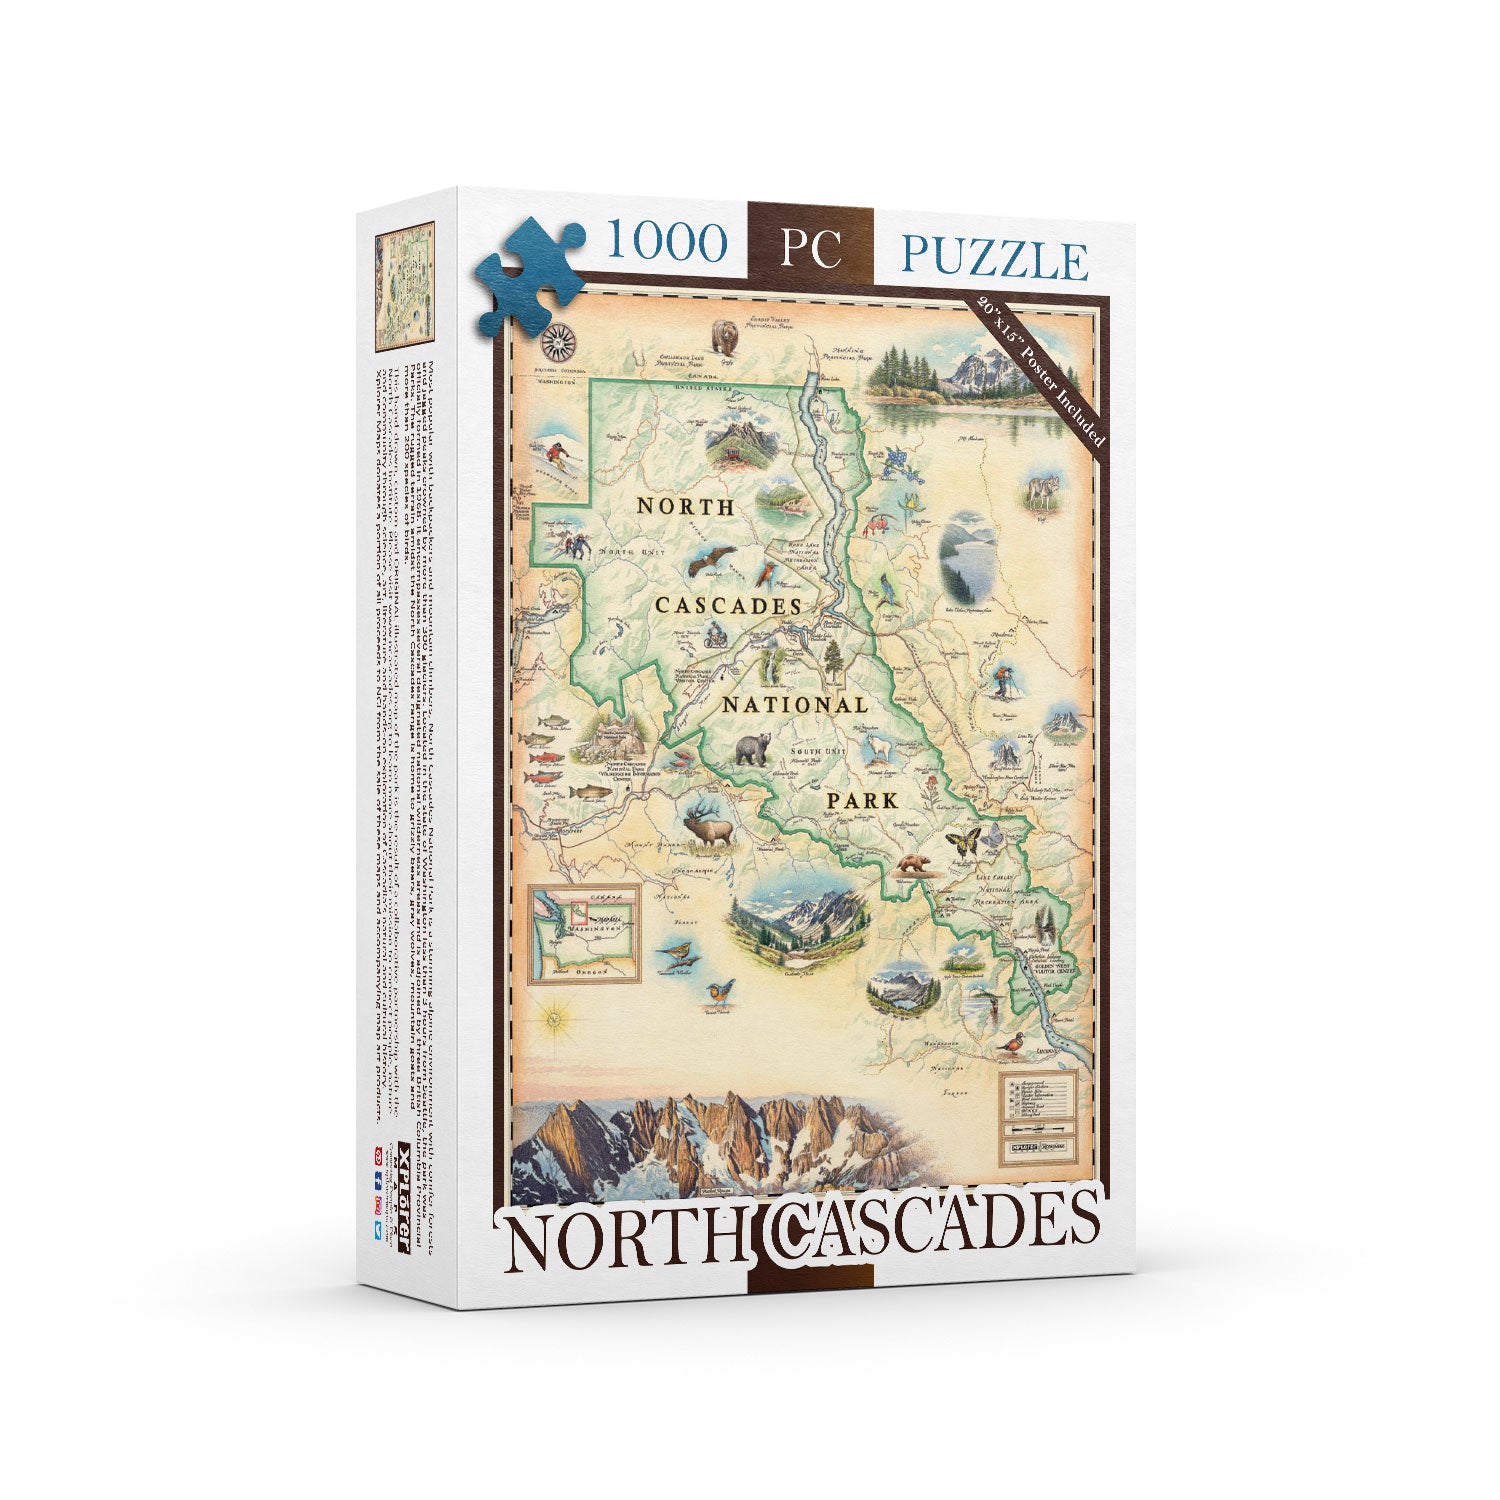 North Cascades National Park Map Jigsaw Puzzle by Xplorer Maps. Features illustrations of flora and fauna such as black bears, elk, wolverine, glacier lilies, and huckleberries. Other illustrations include Pickett Range, Cascade Pass, and Lake Chelan Recreation area.